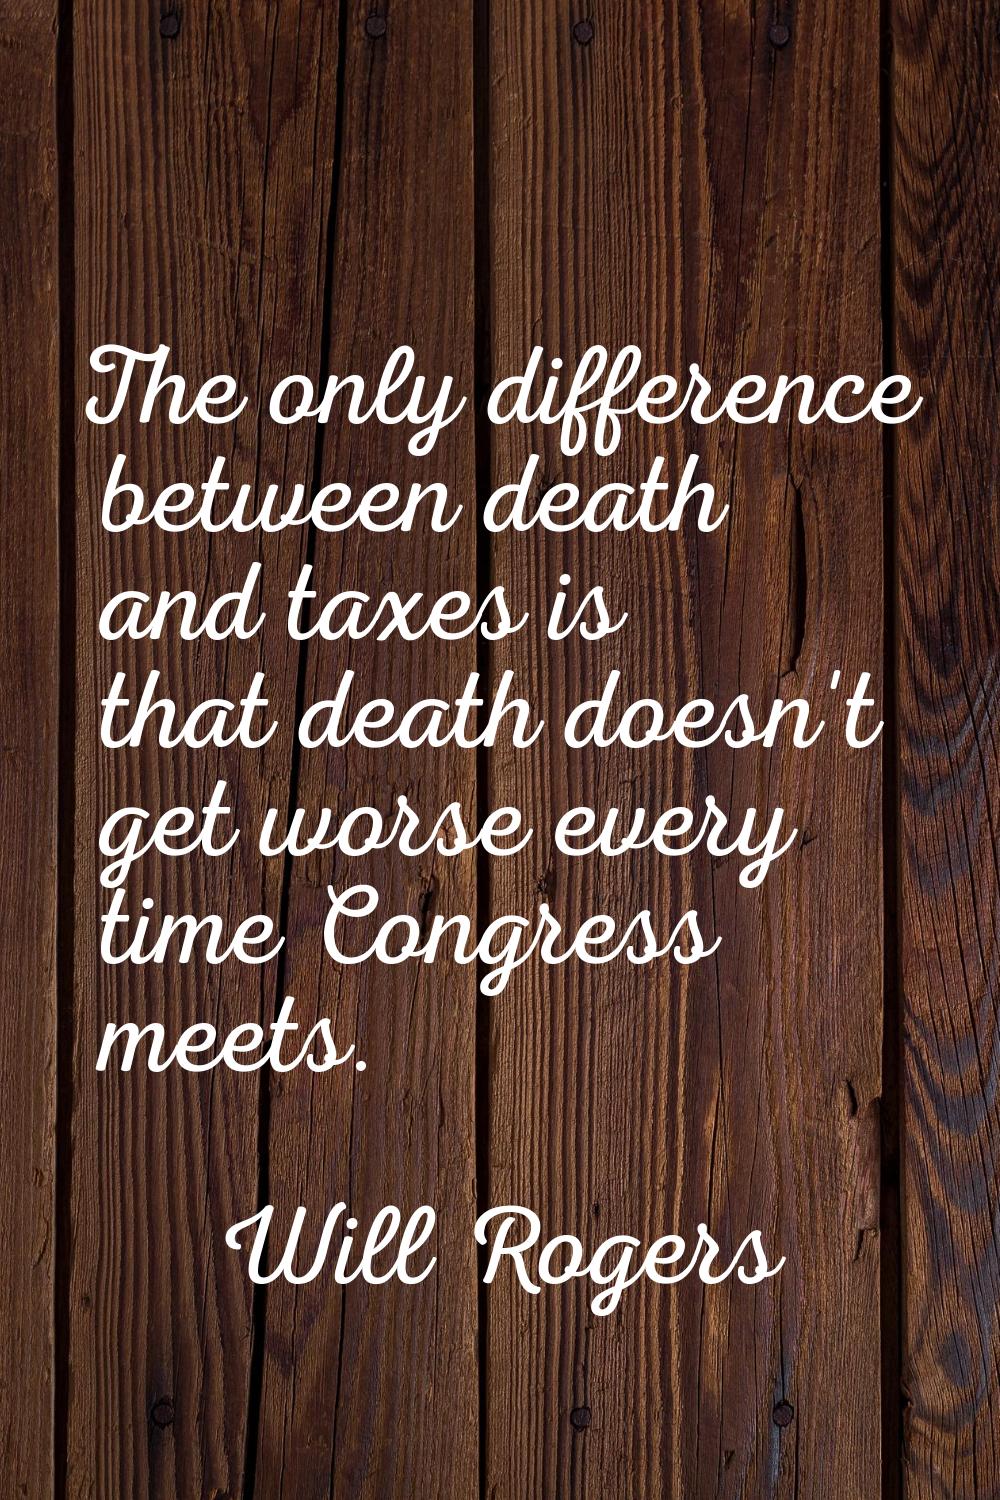 The only difference between death and taxes is that death doesn't get worse every time Congress mee